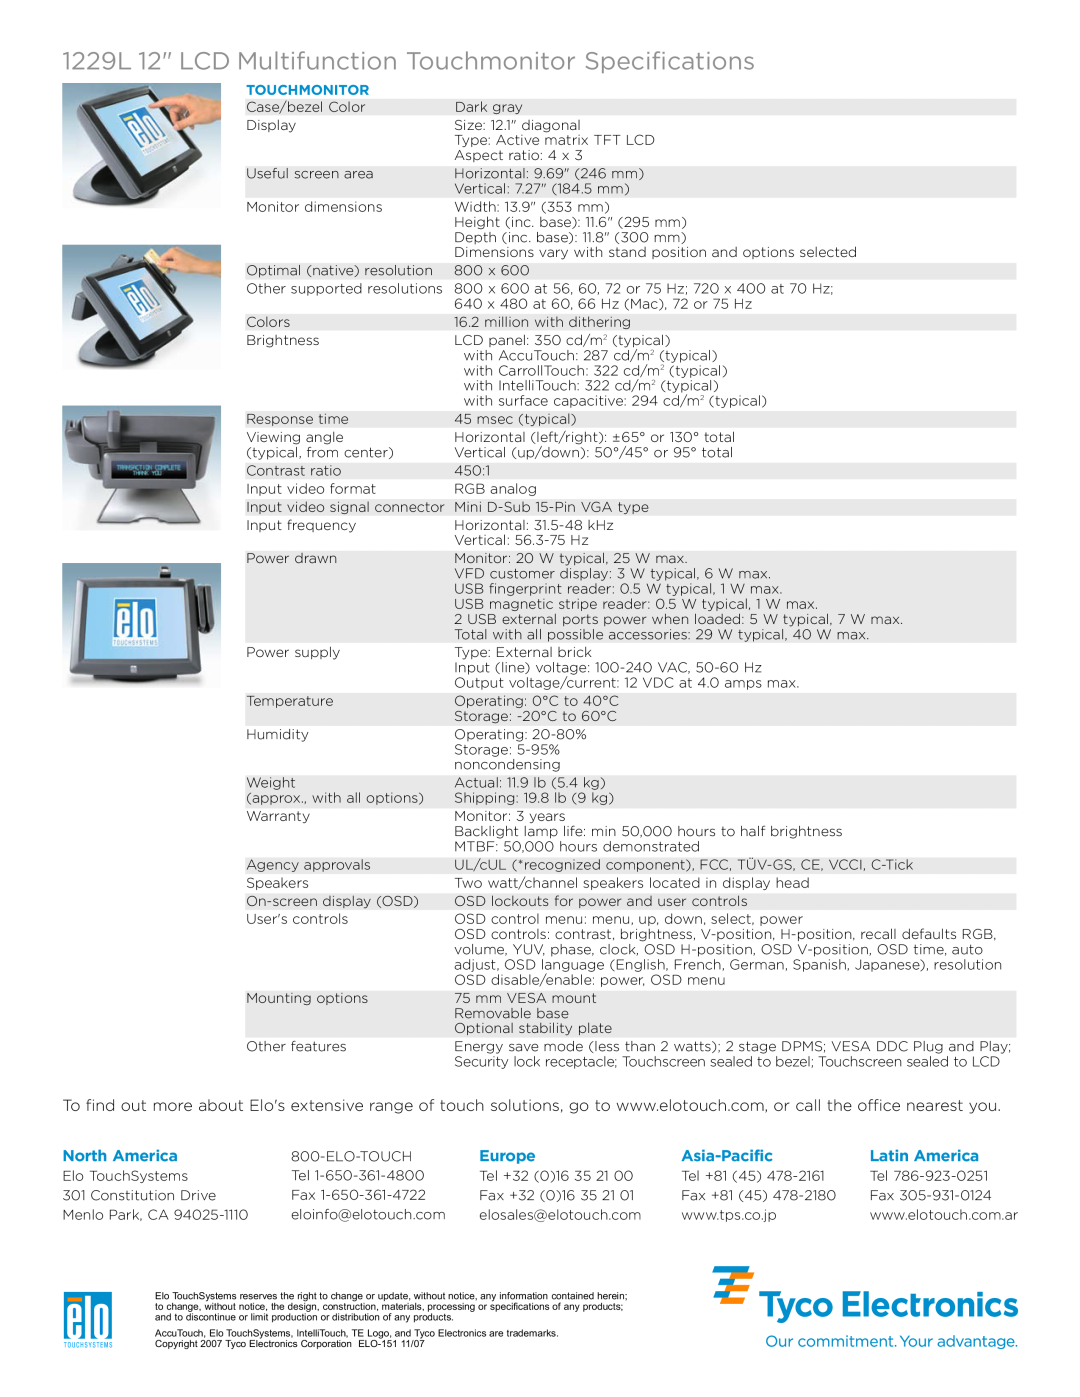 Elo TouchSystems manual 1229L 12 LCD Multifunction Touchmonitor Specifications, North America, Europe, Asia-Pacific 